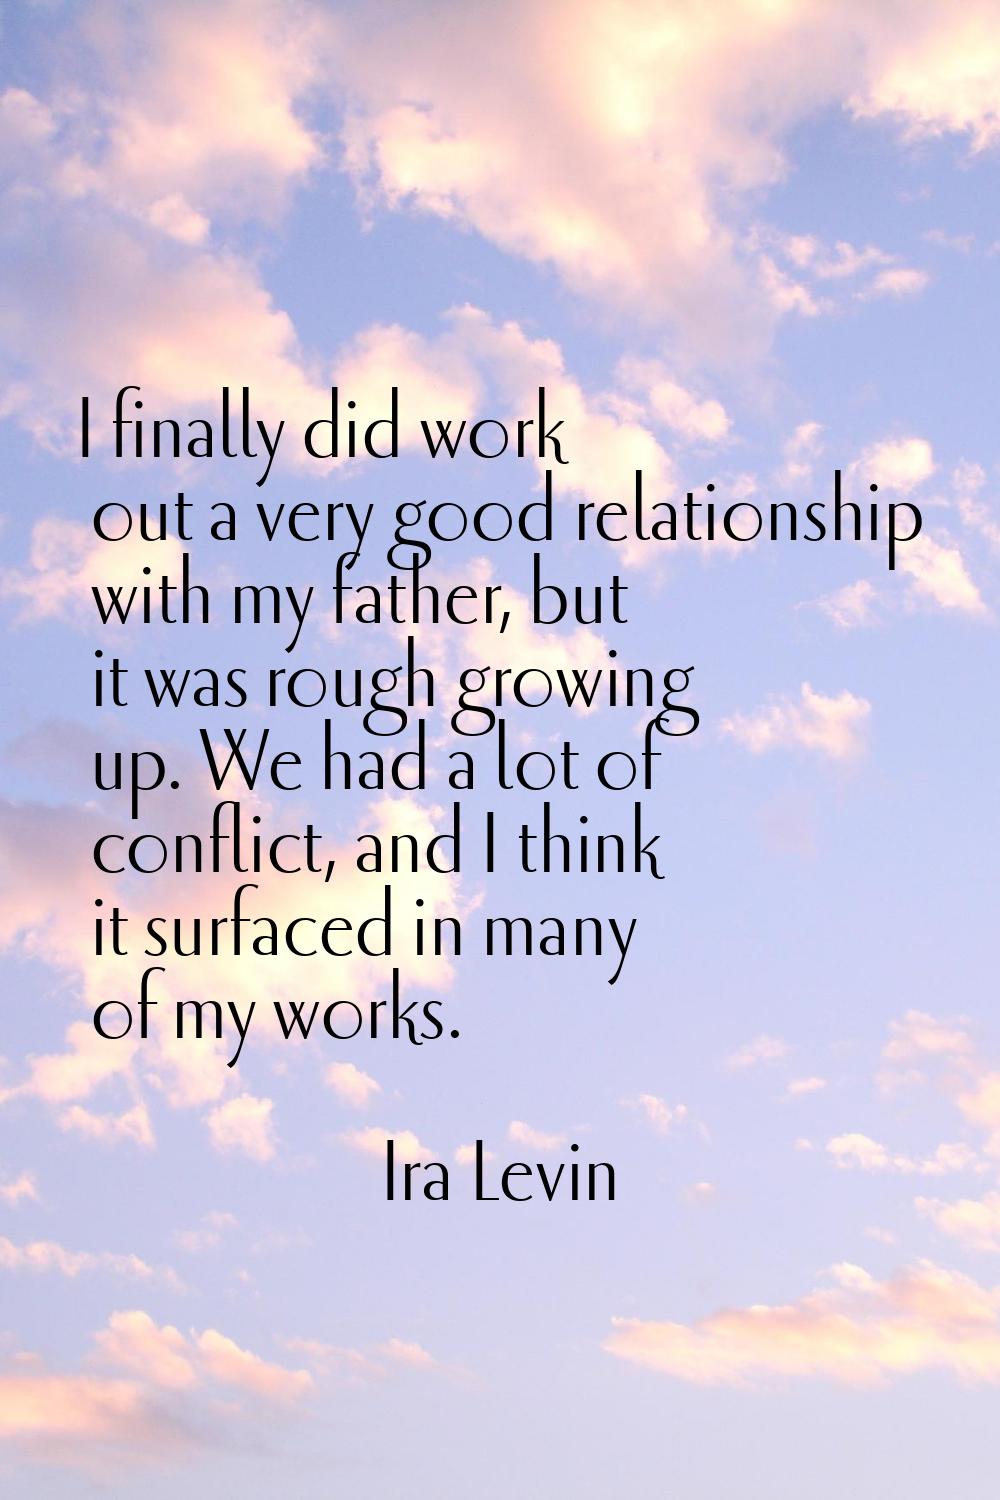 I finally did work out a very good relationship with my father, but it was rough growing up. We had